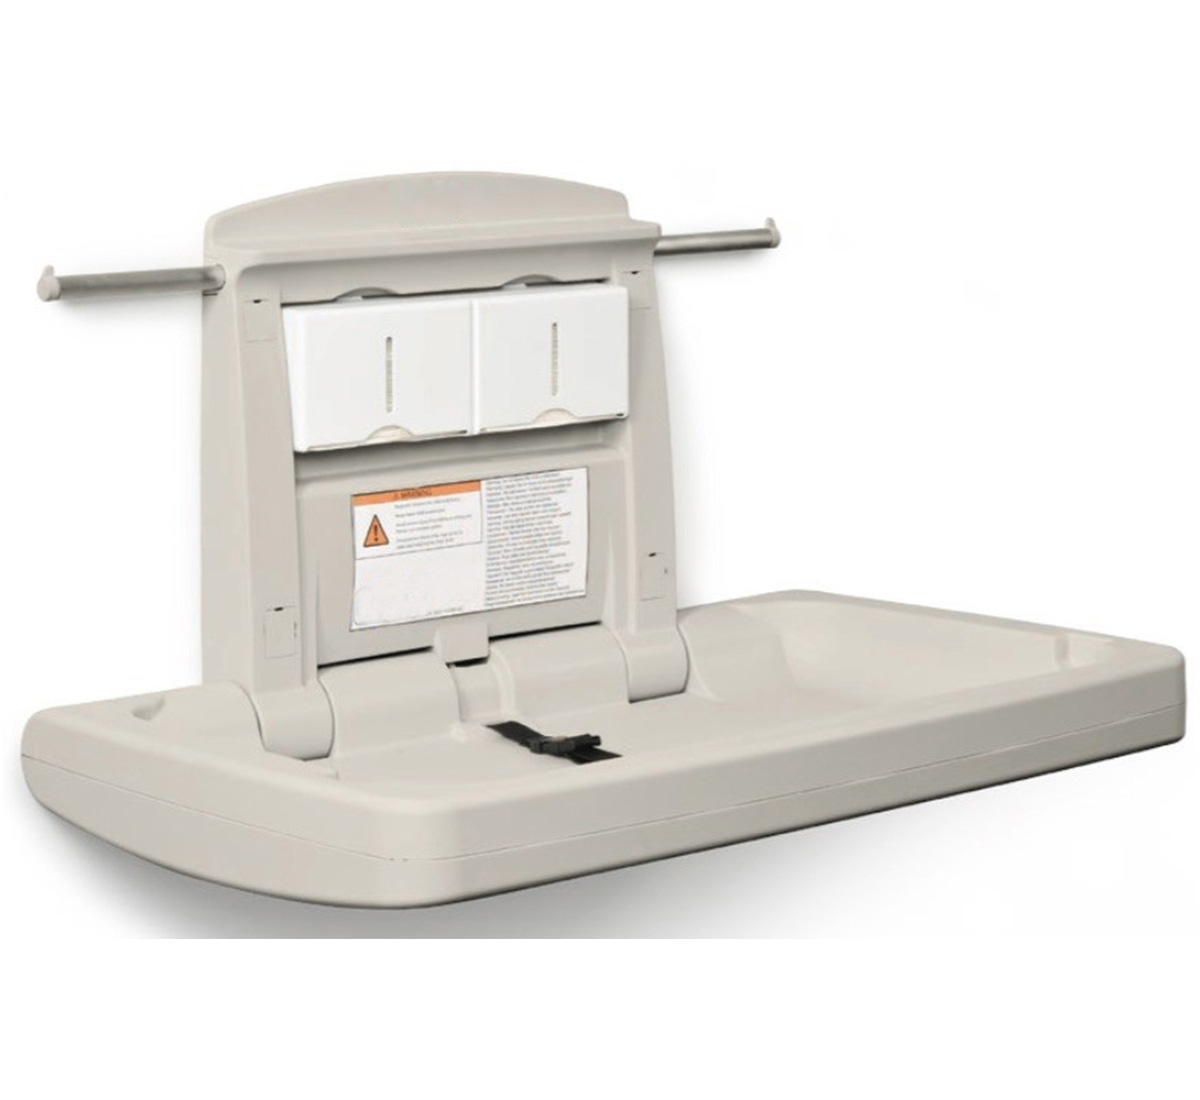 White HDPE baby changing station 25kg